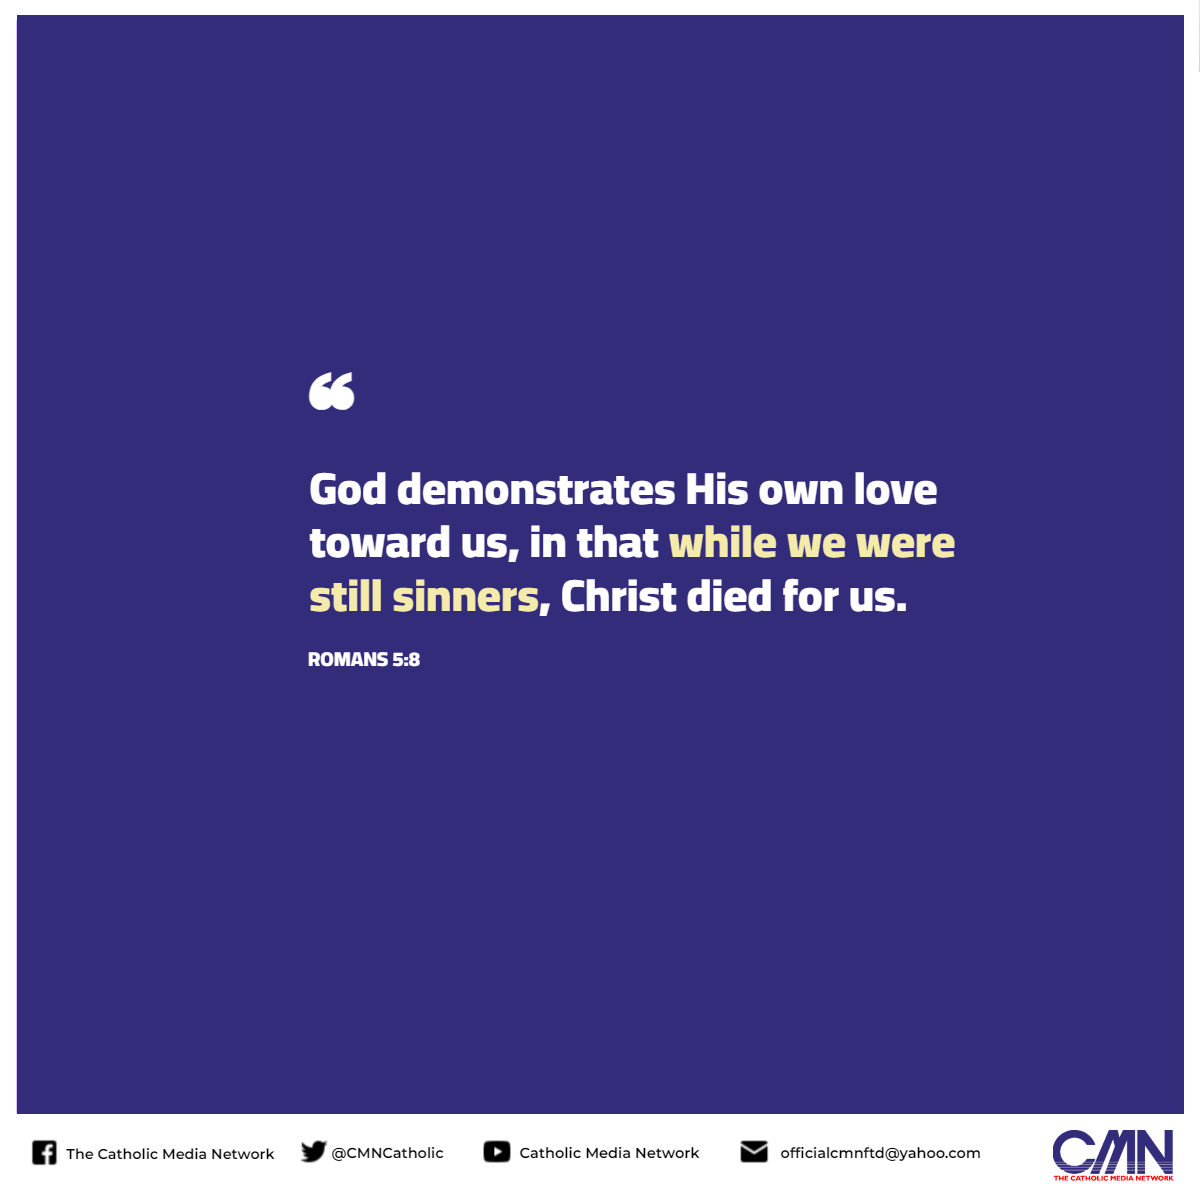 ❝ God demonstrates His own #love toward us, in that while we were still sinners, Christ died for us. #Romans5:8

#BlessedThursday #cmn